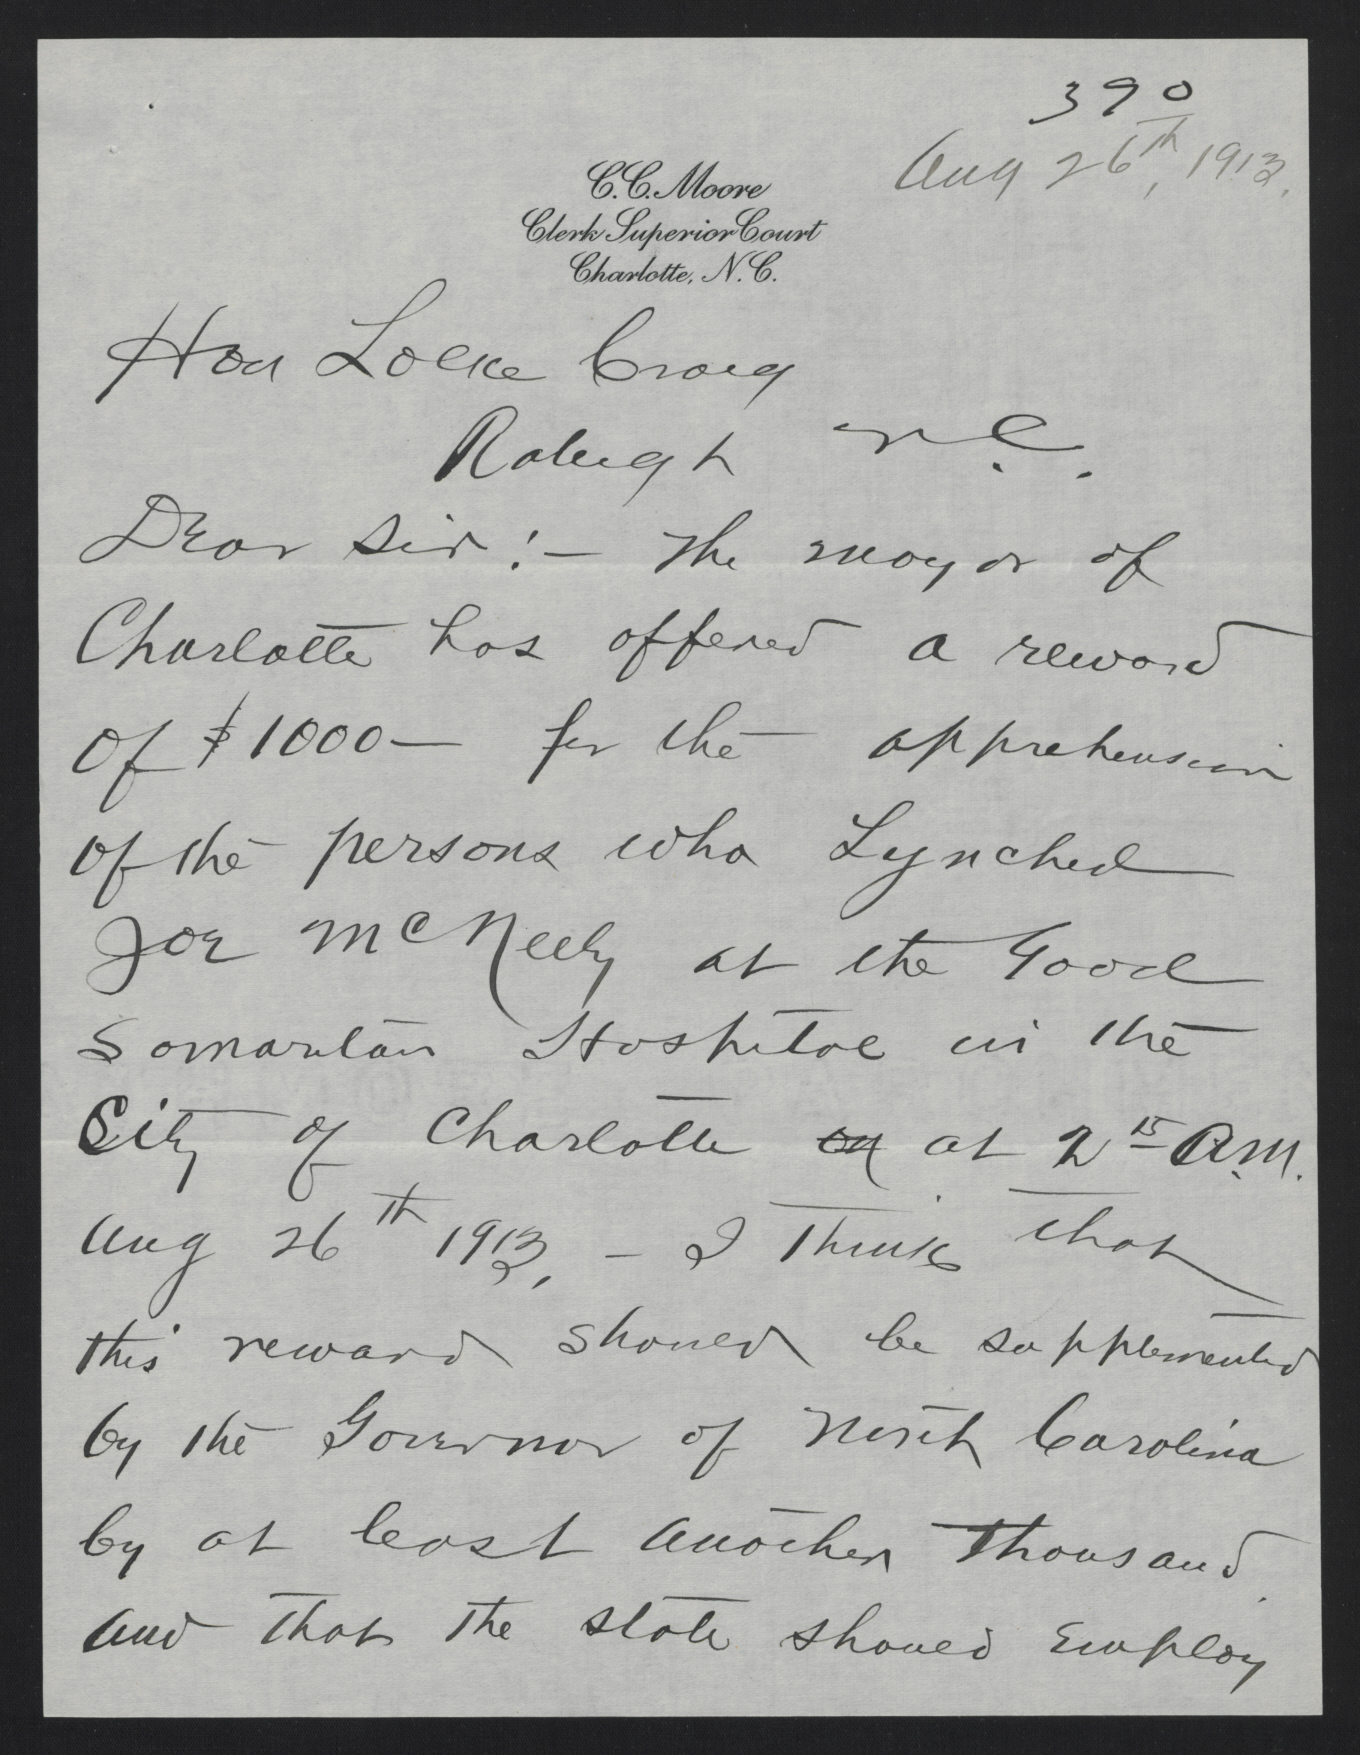 Letter from Wilson to Craig, August 26, 1913, page 1